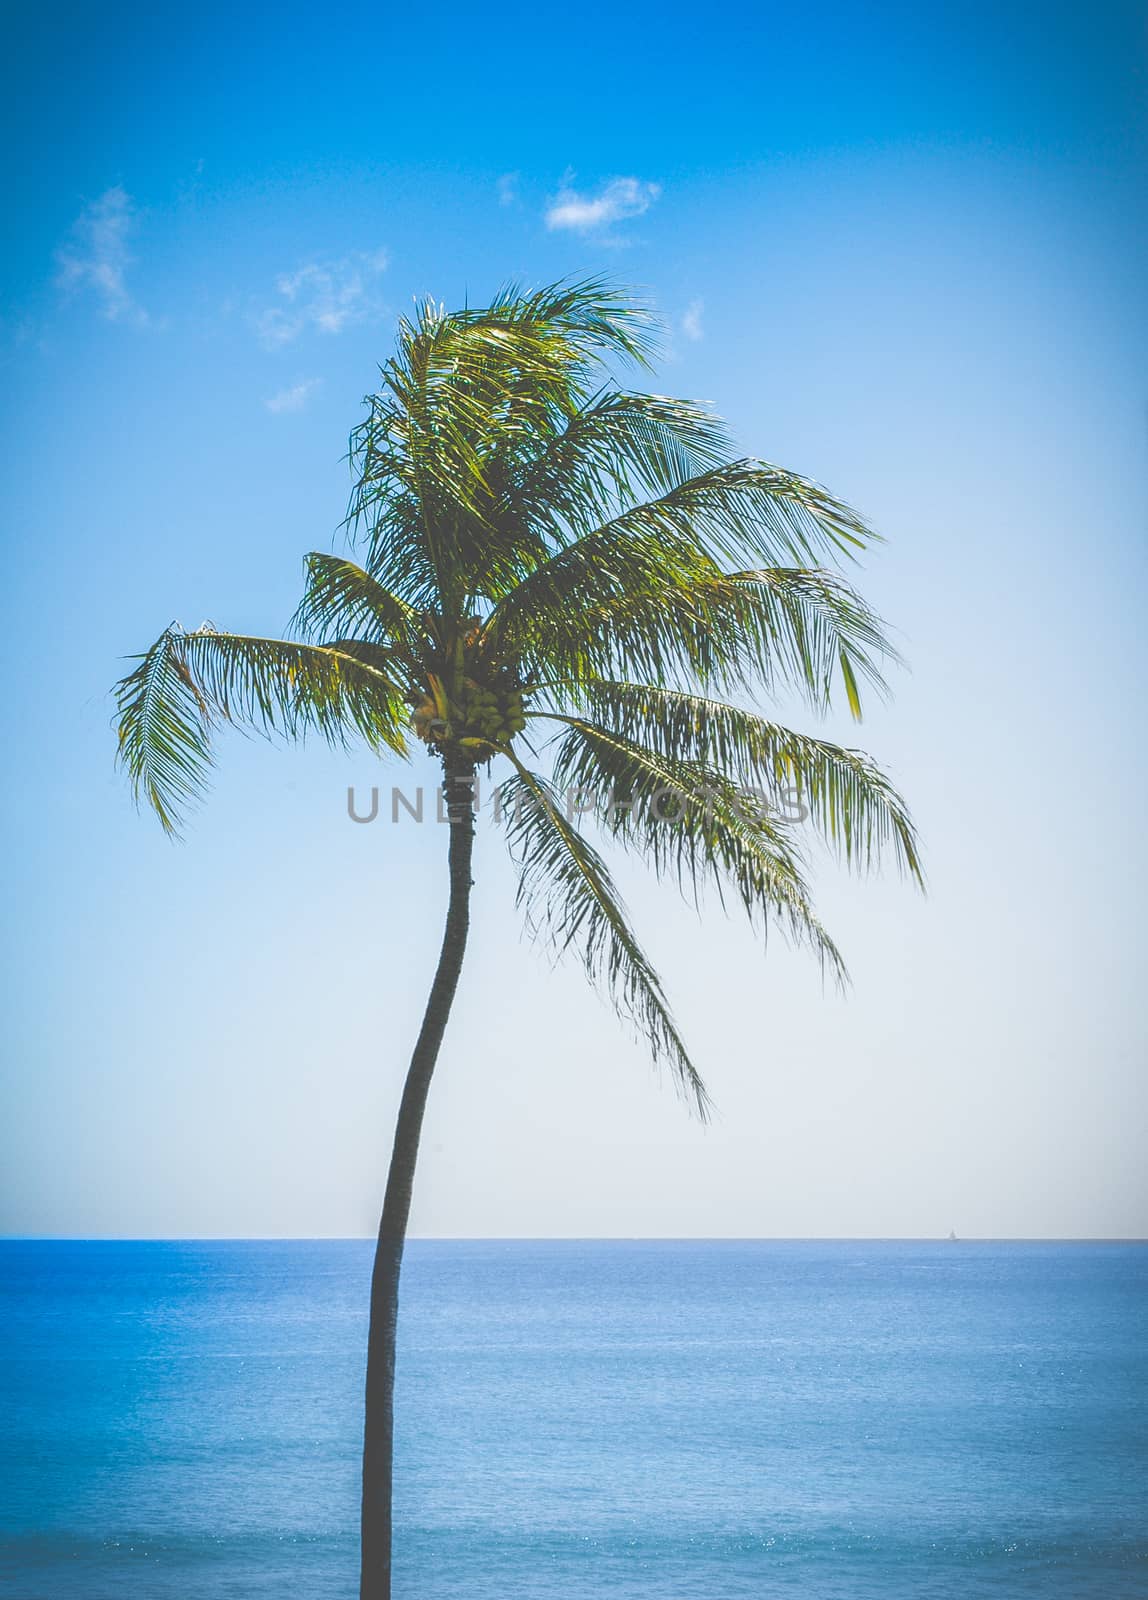 Retro Filtered Single Palm Tree By The Ocean In Hawaii